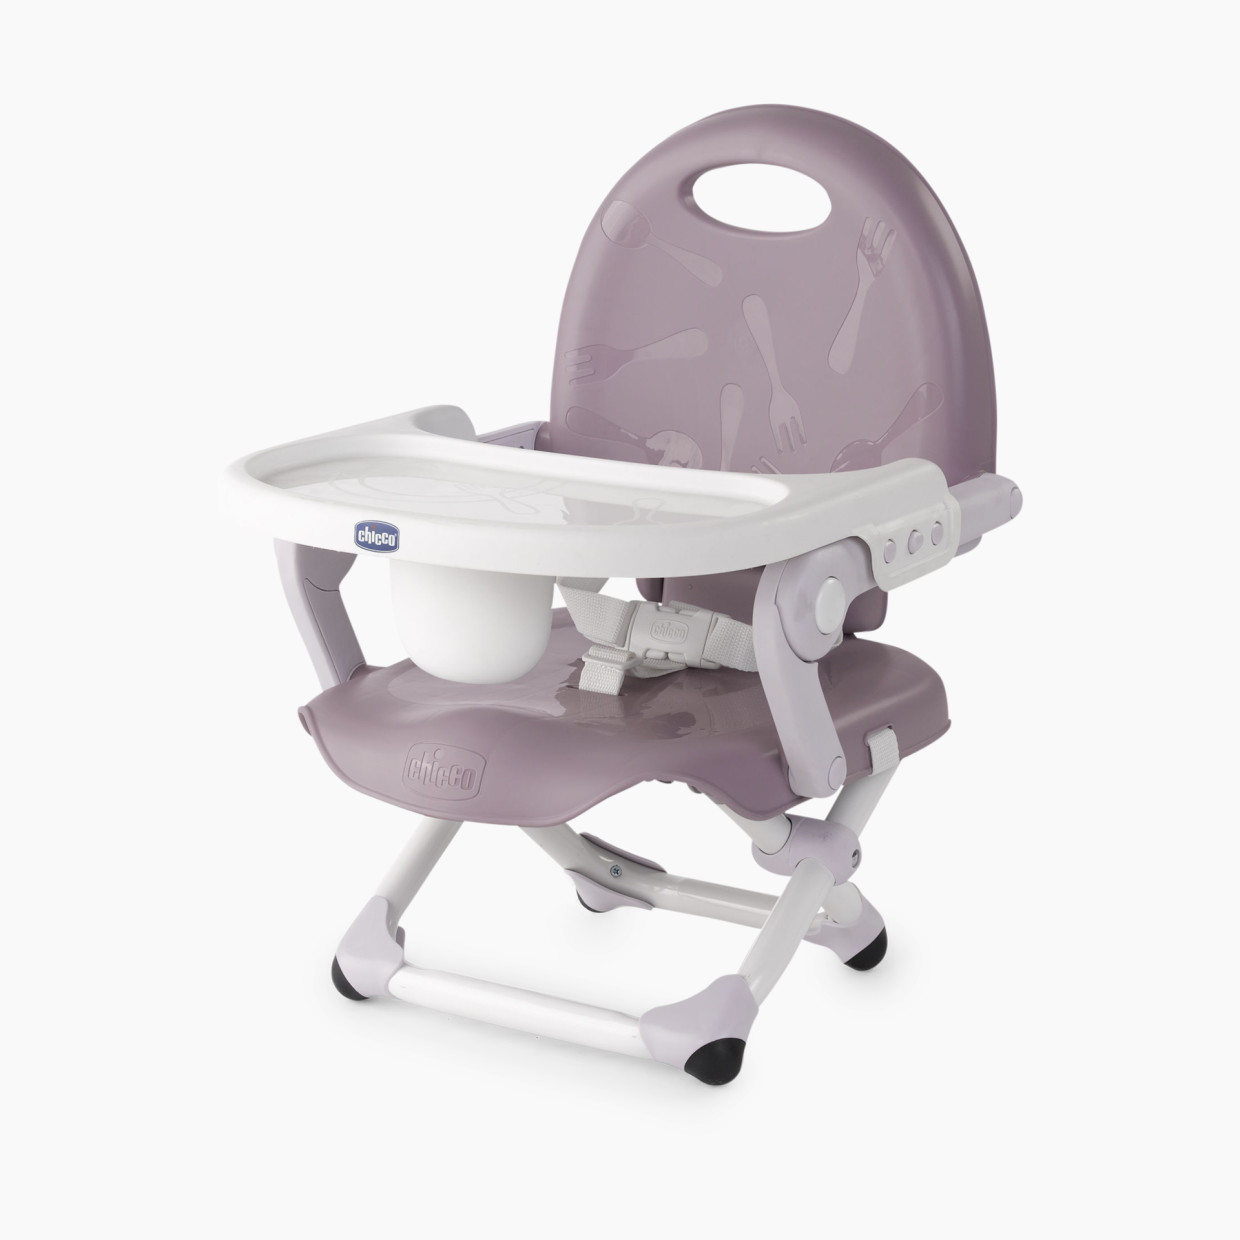 Chicco Pocket Snack Booster Seat - Lavender.